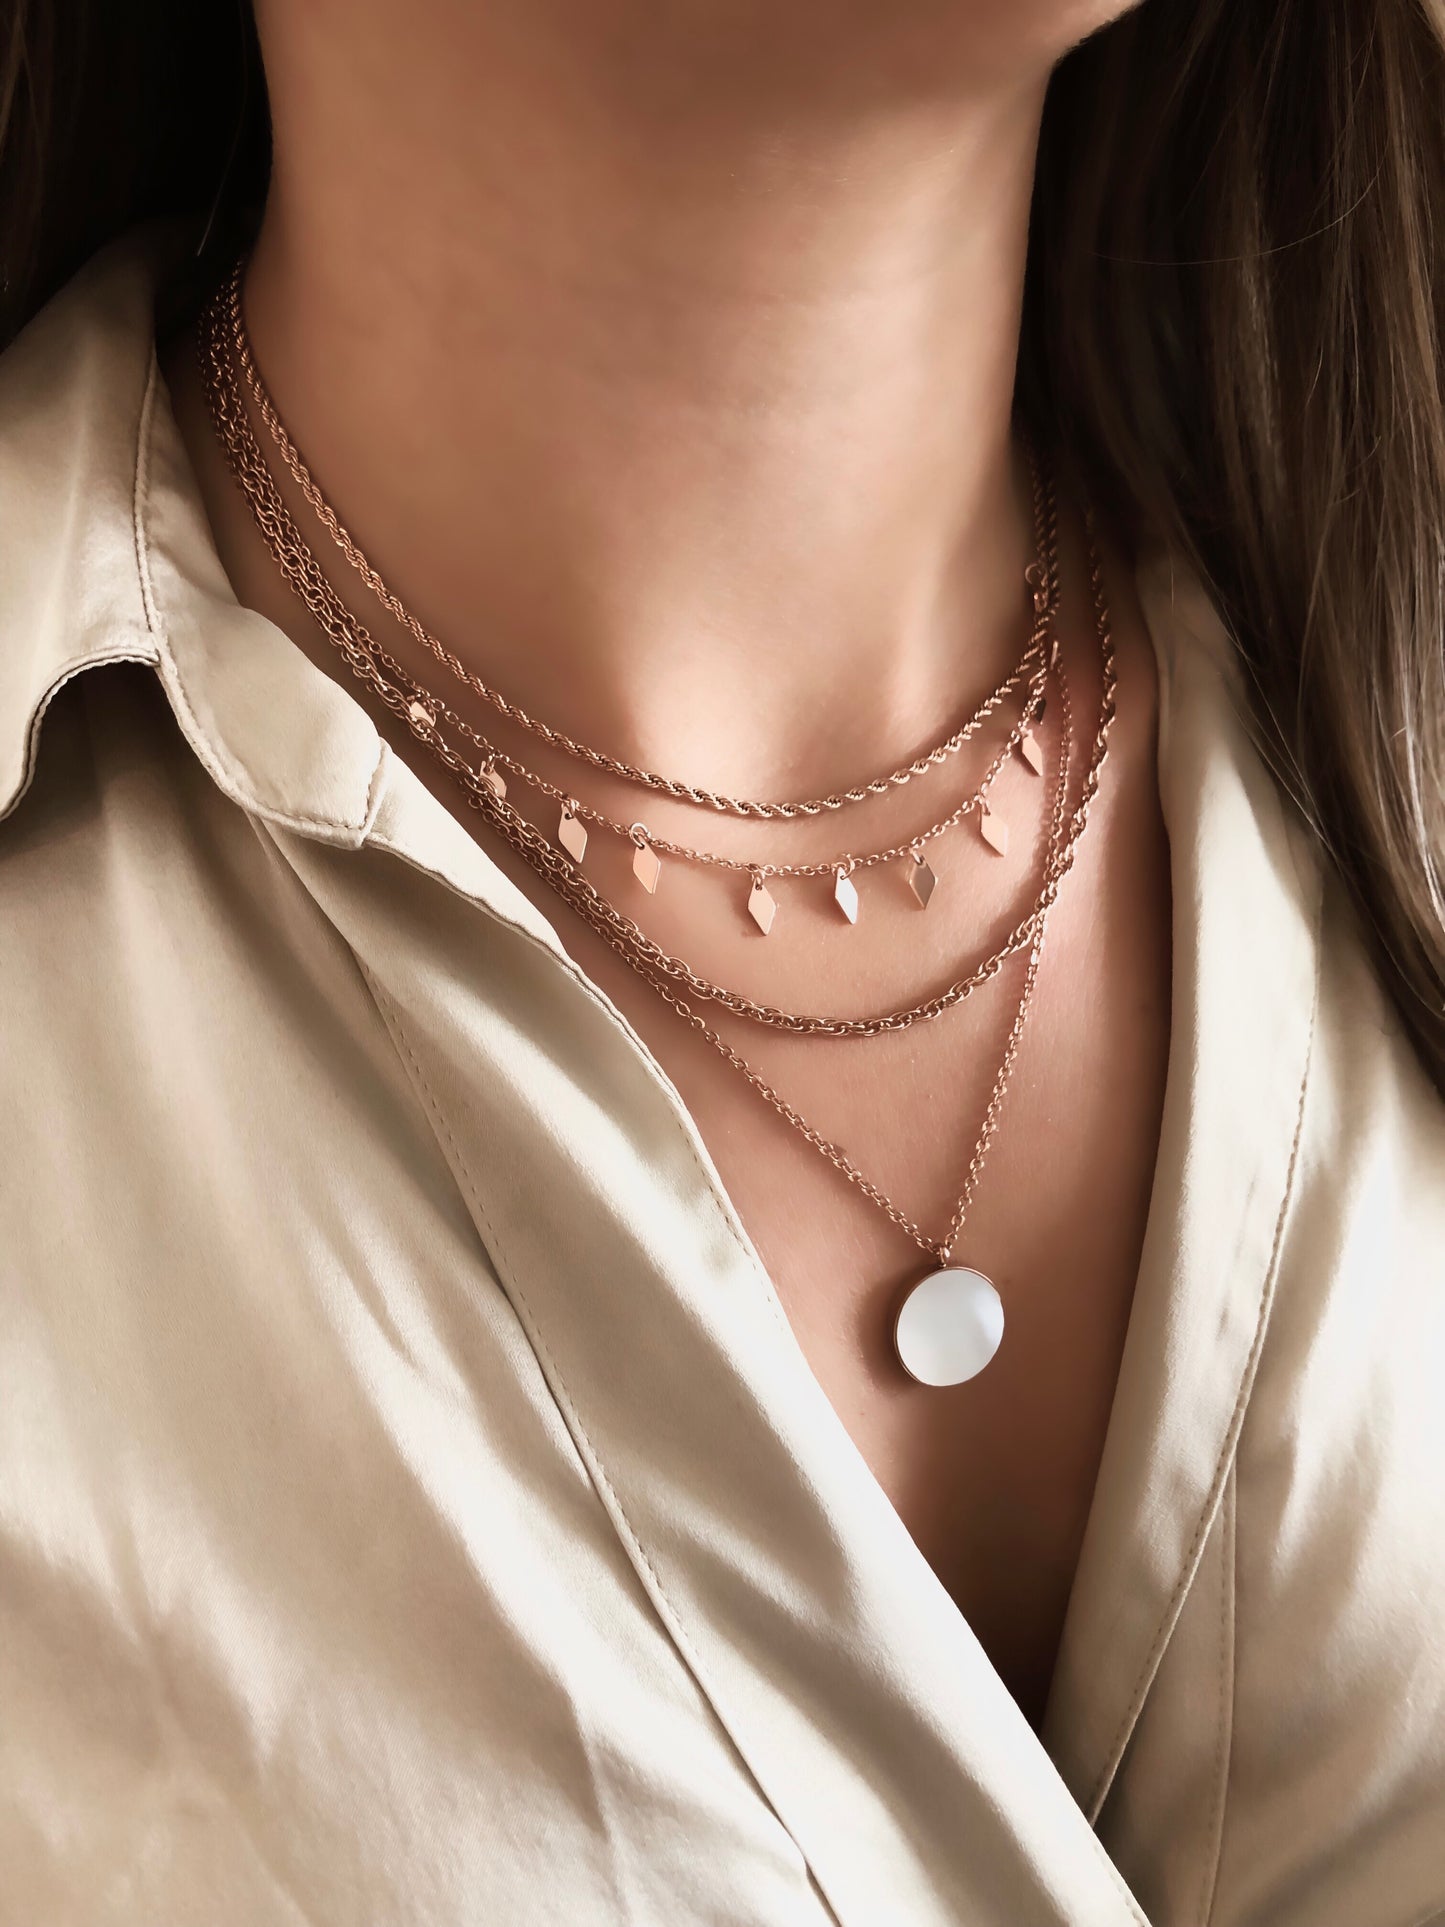 Maker Collection - Rose Gold Twisted Ornate Necklace Chain